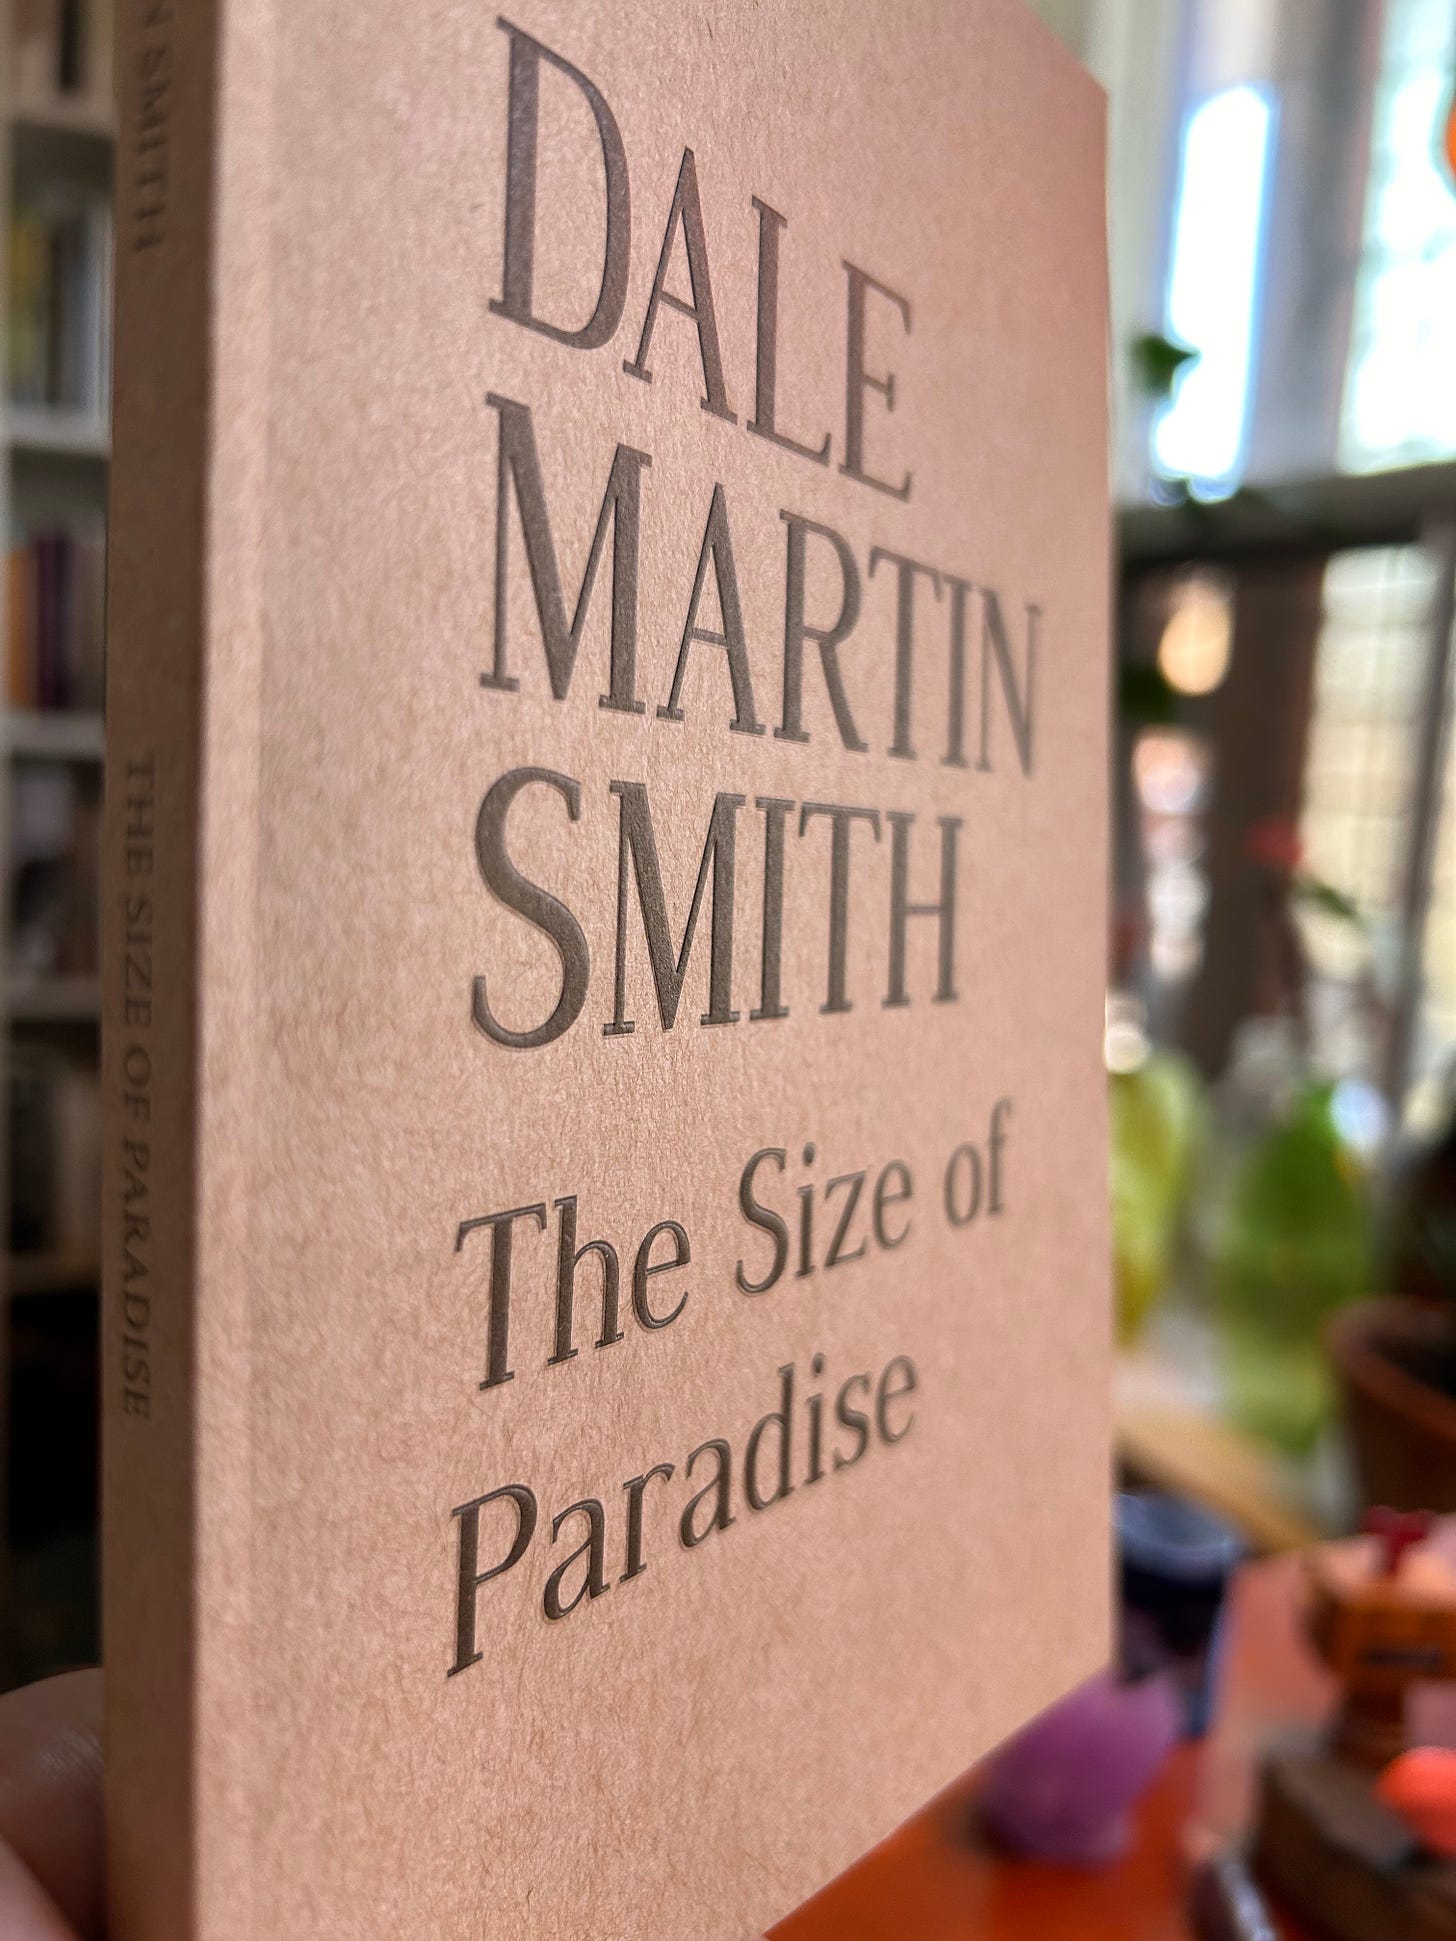 Dale Martin Smith: The Size of Paradise